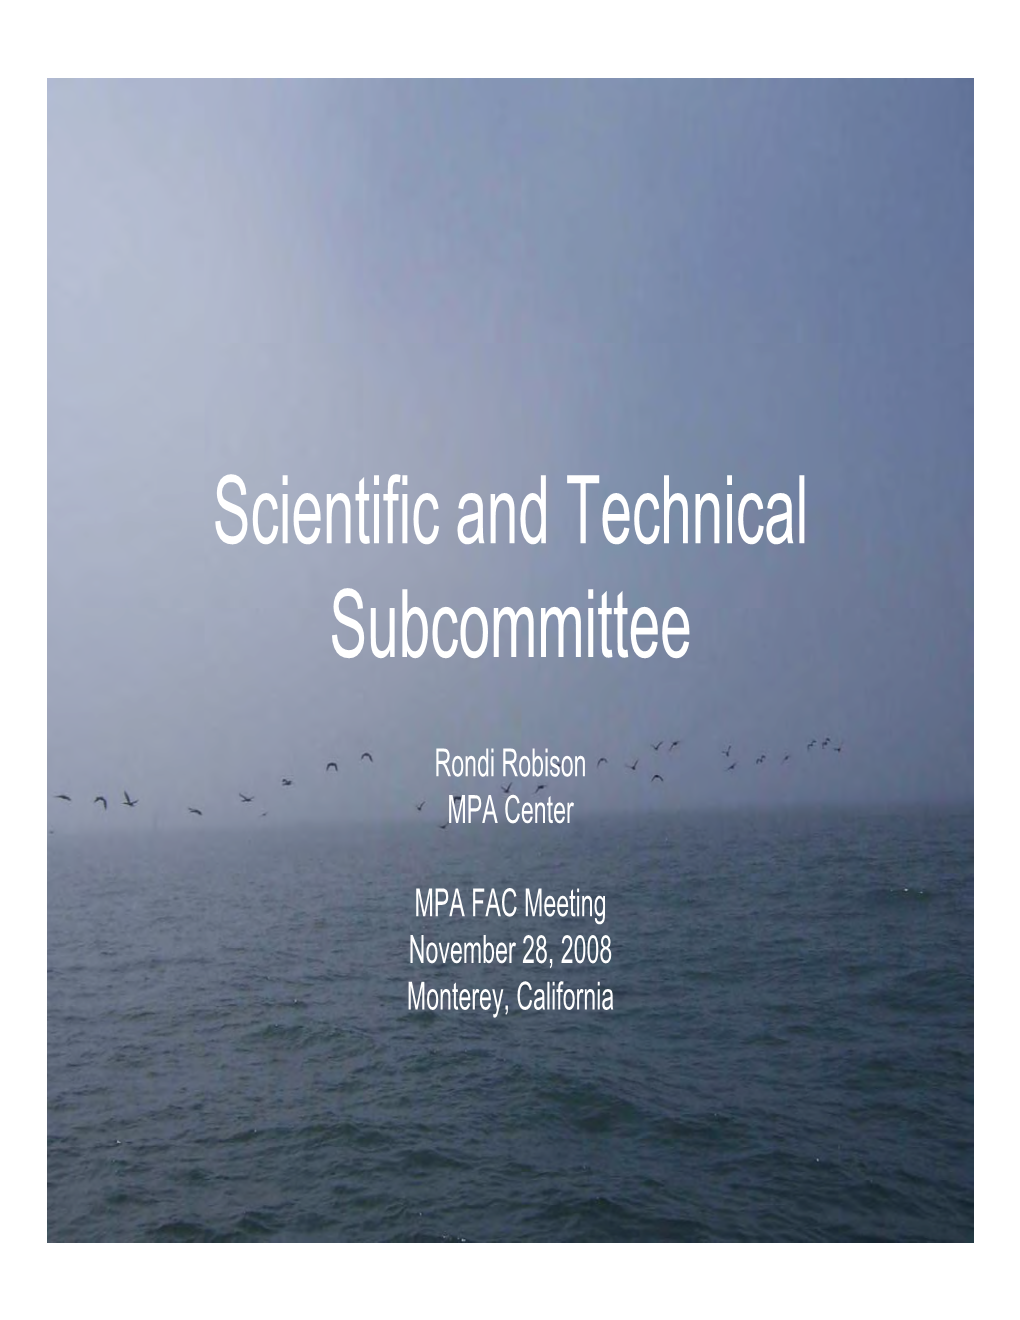 Scientific and Technical Subcommittee